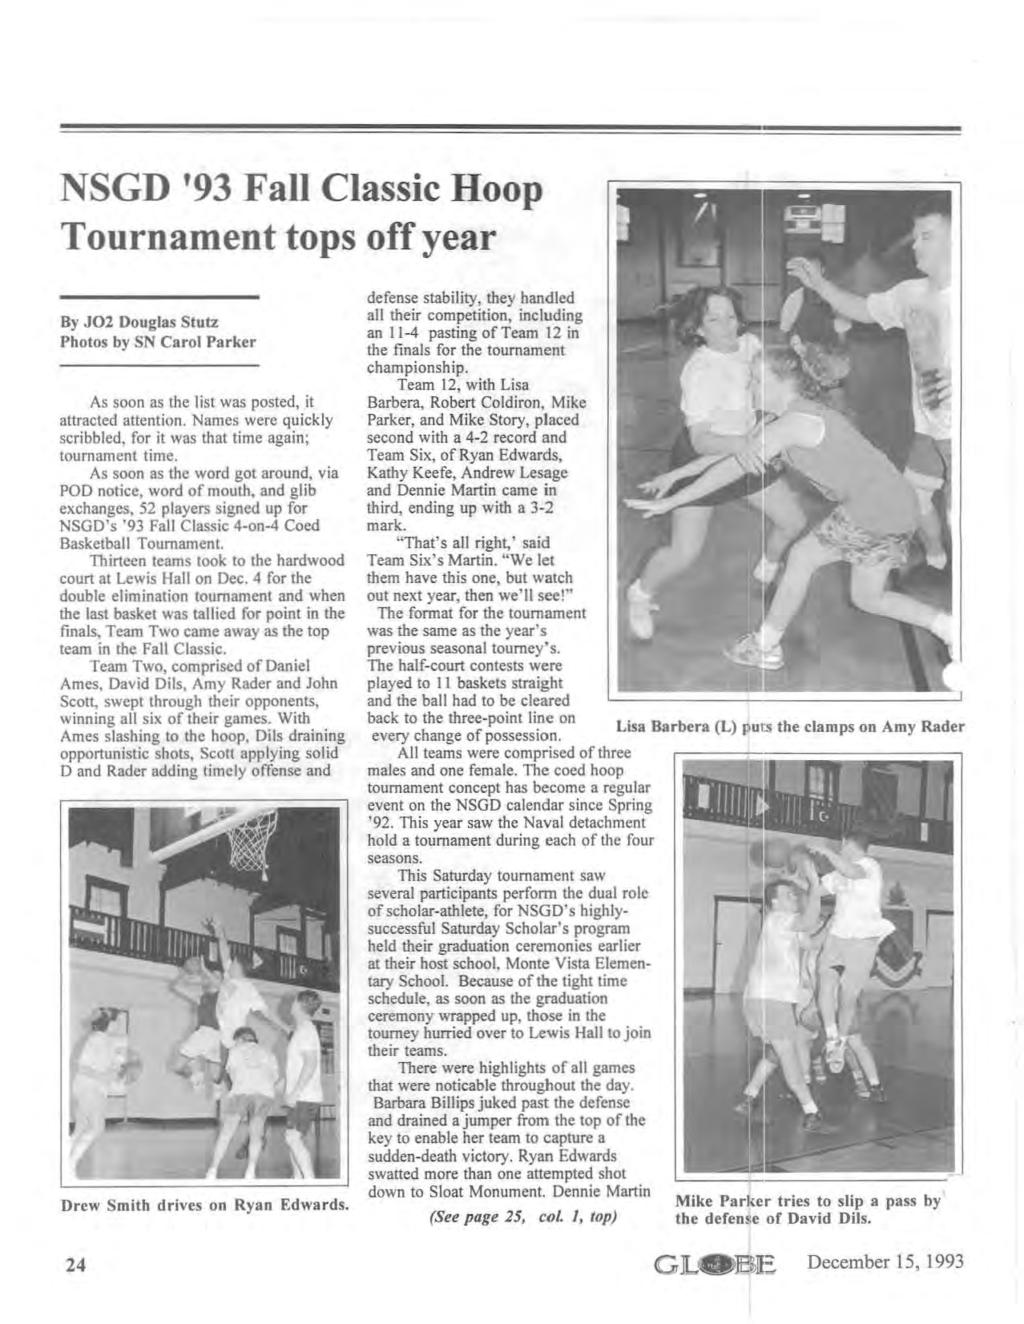 NSGD '93 Fall Classic Hoop Tournament tops off year By J02 Douglas Stutz Photos by SN Carol Parker As soon as the list was posted, it attracted attention.